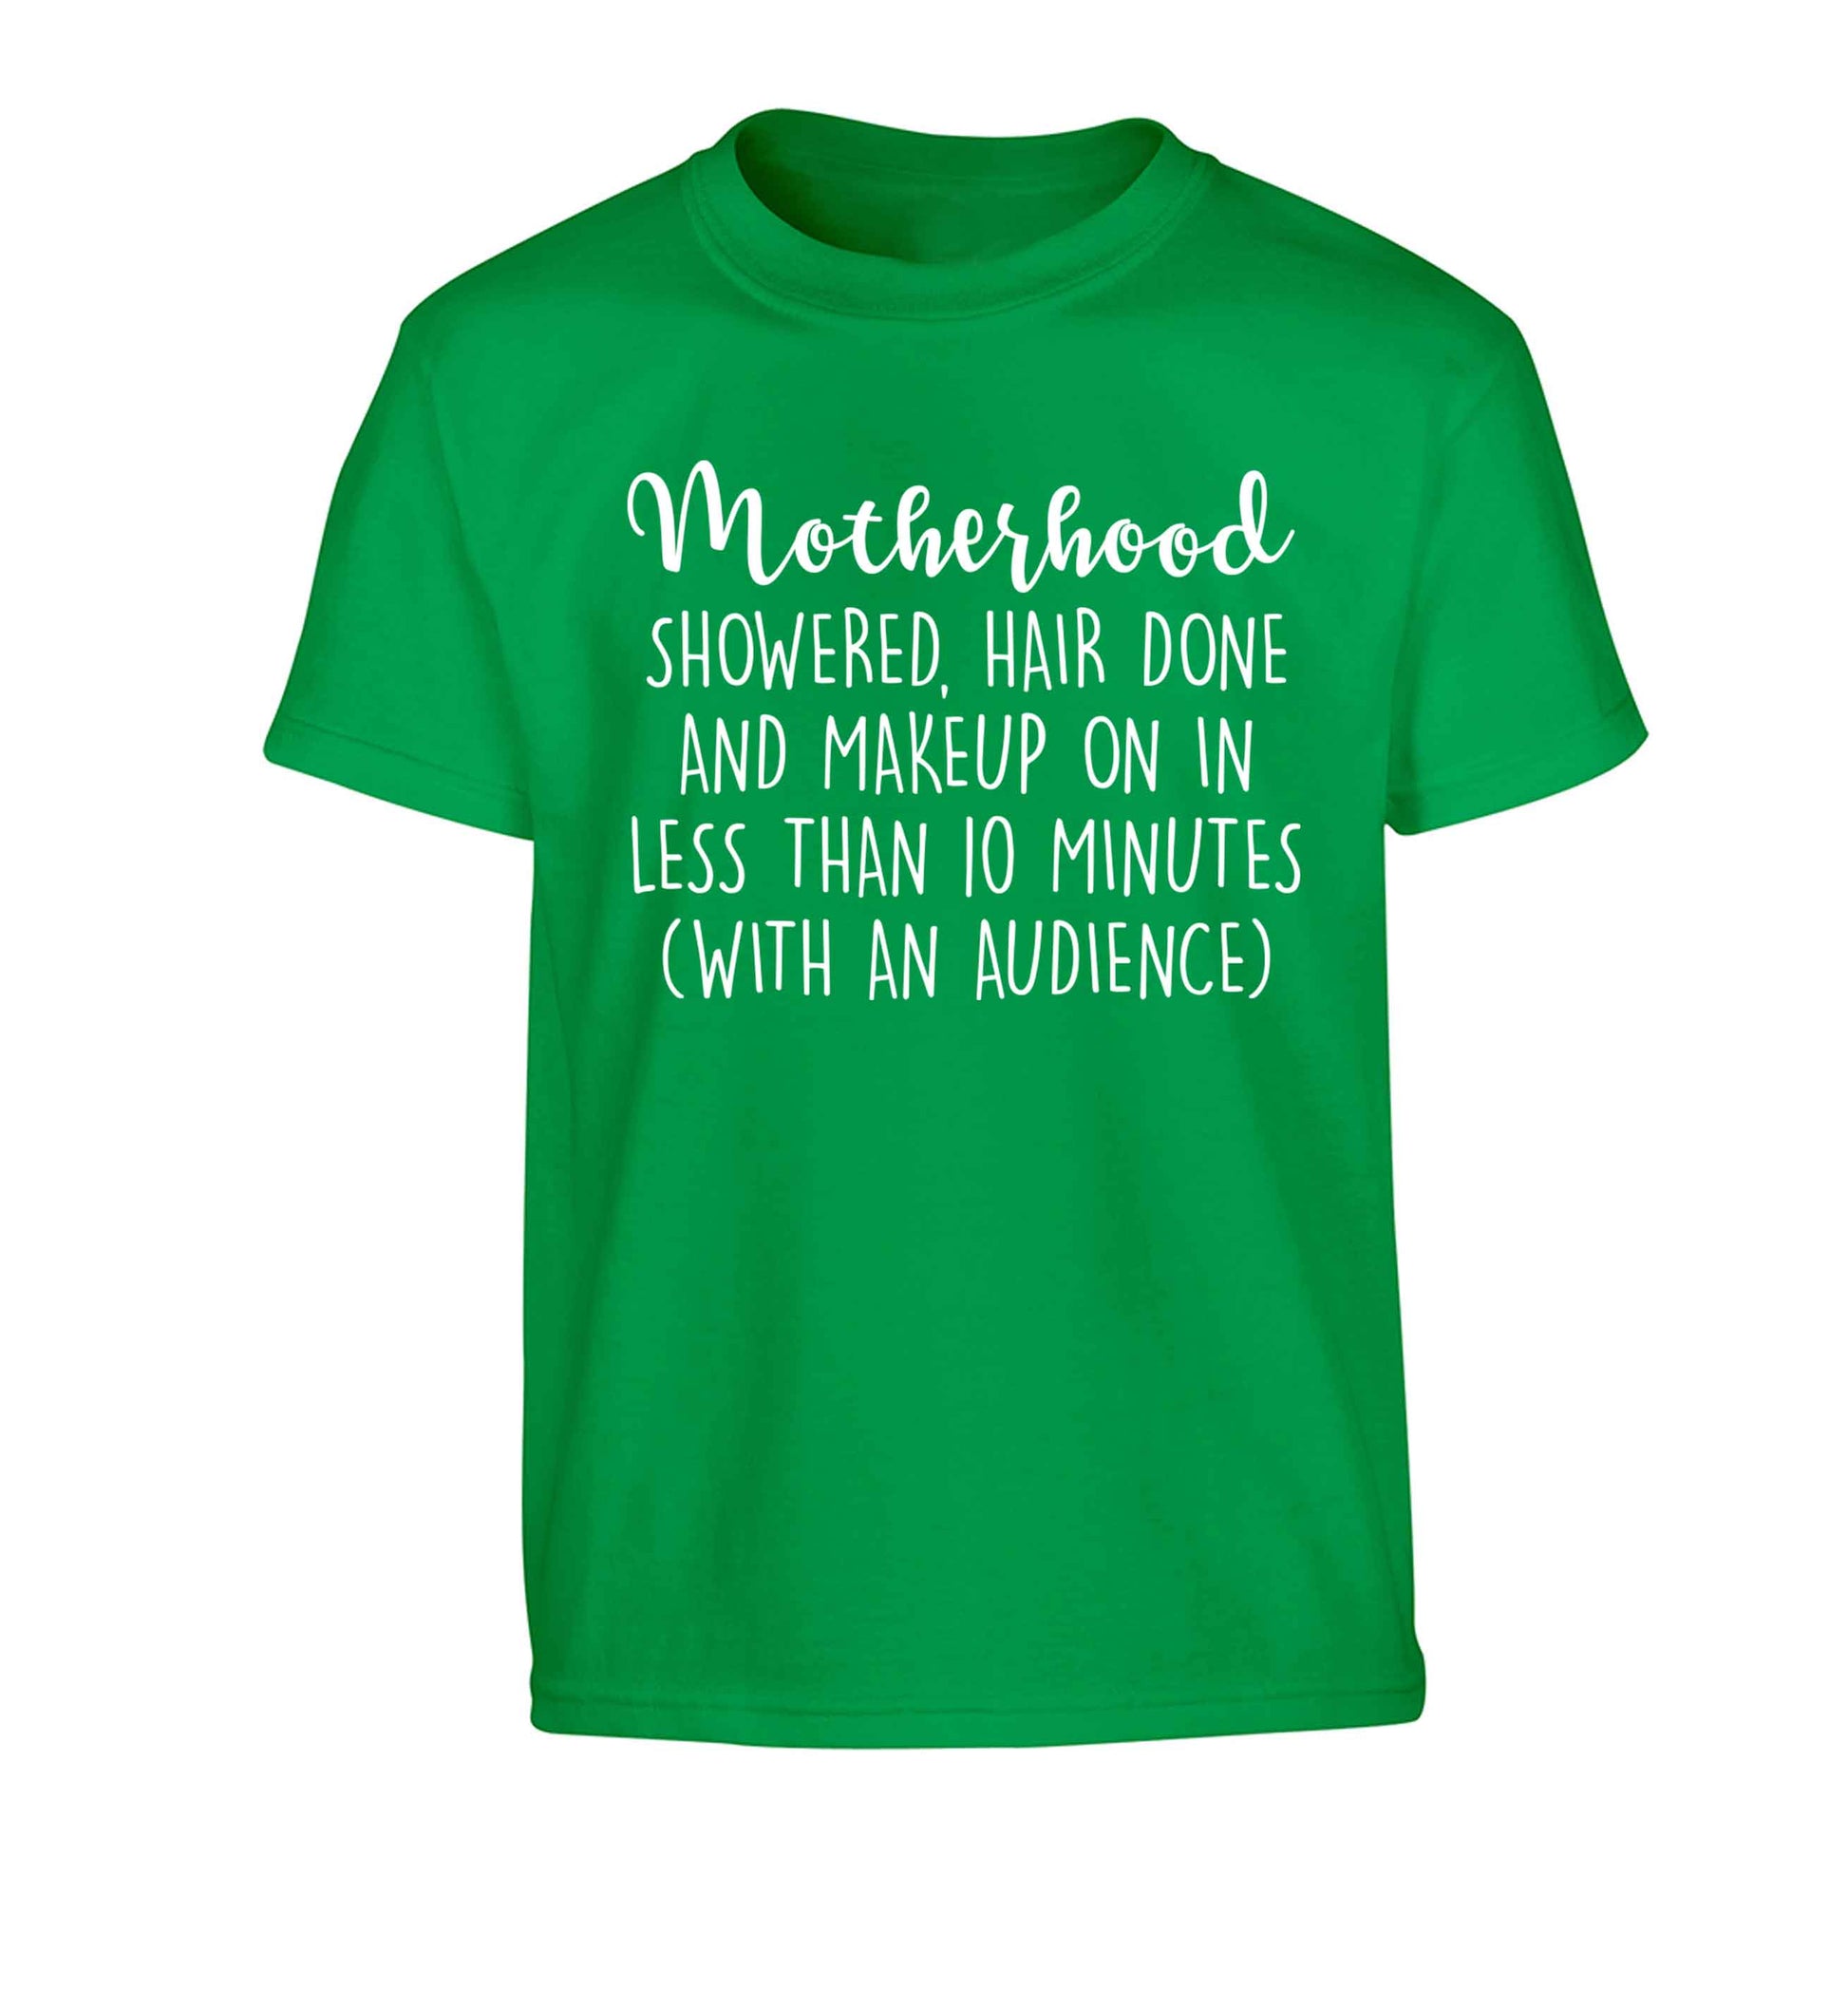 Motherhood, showered, hair done and makeup on Children's green Tshirt 12-13 Years